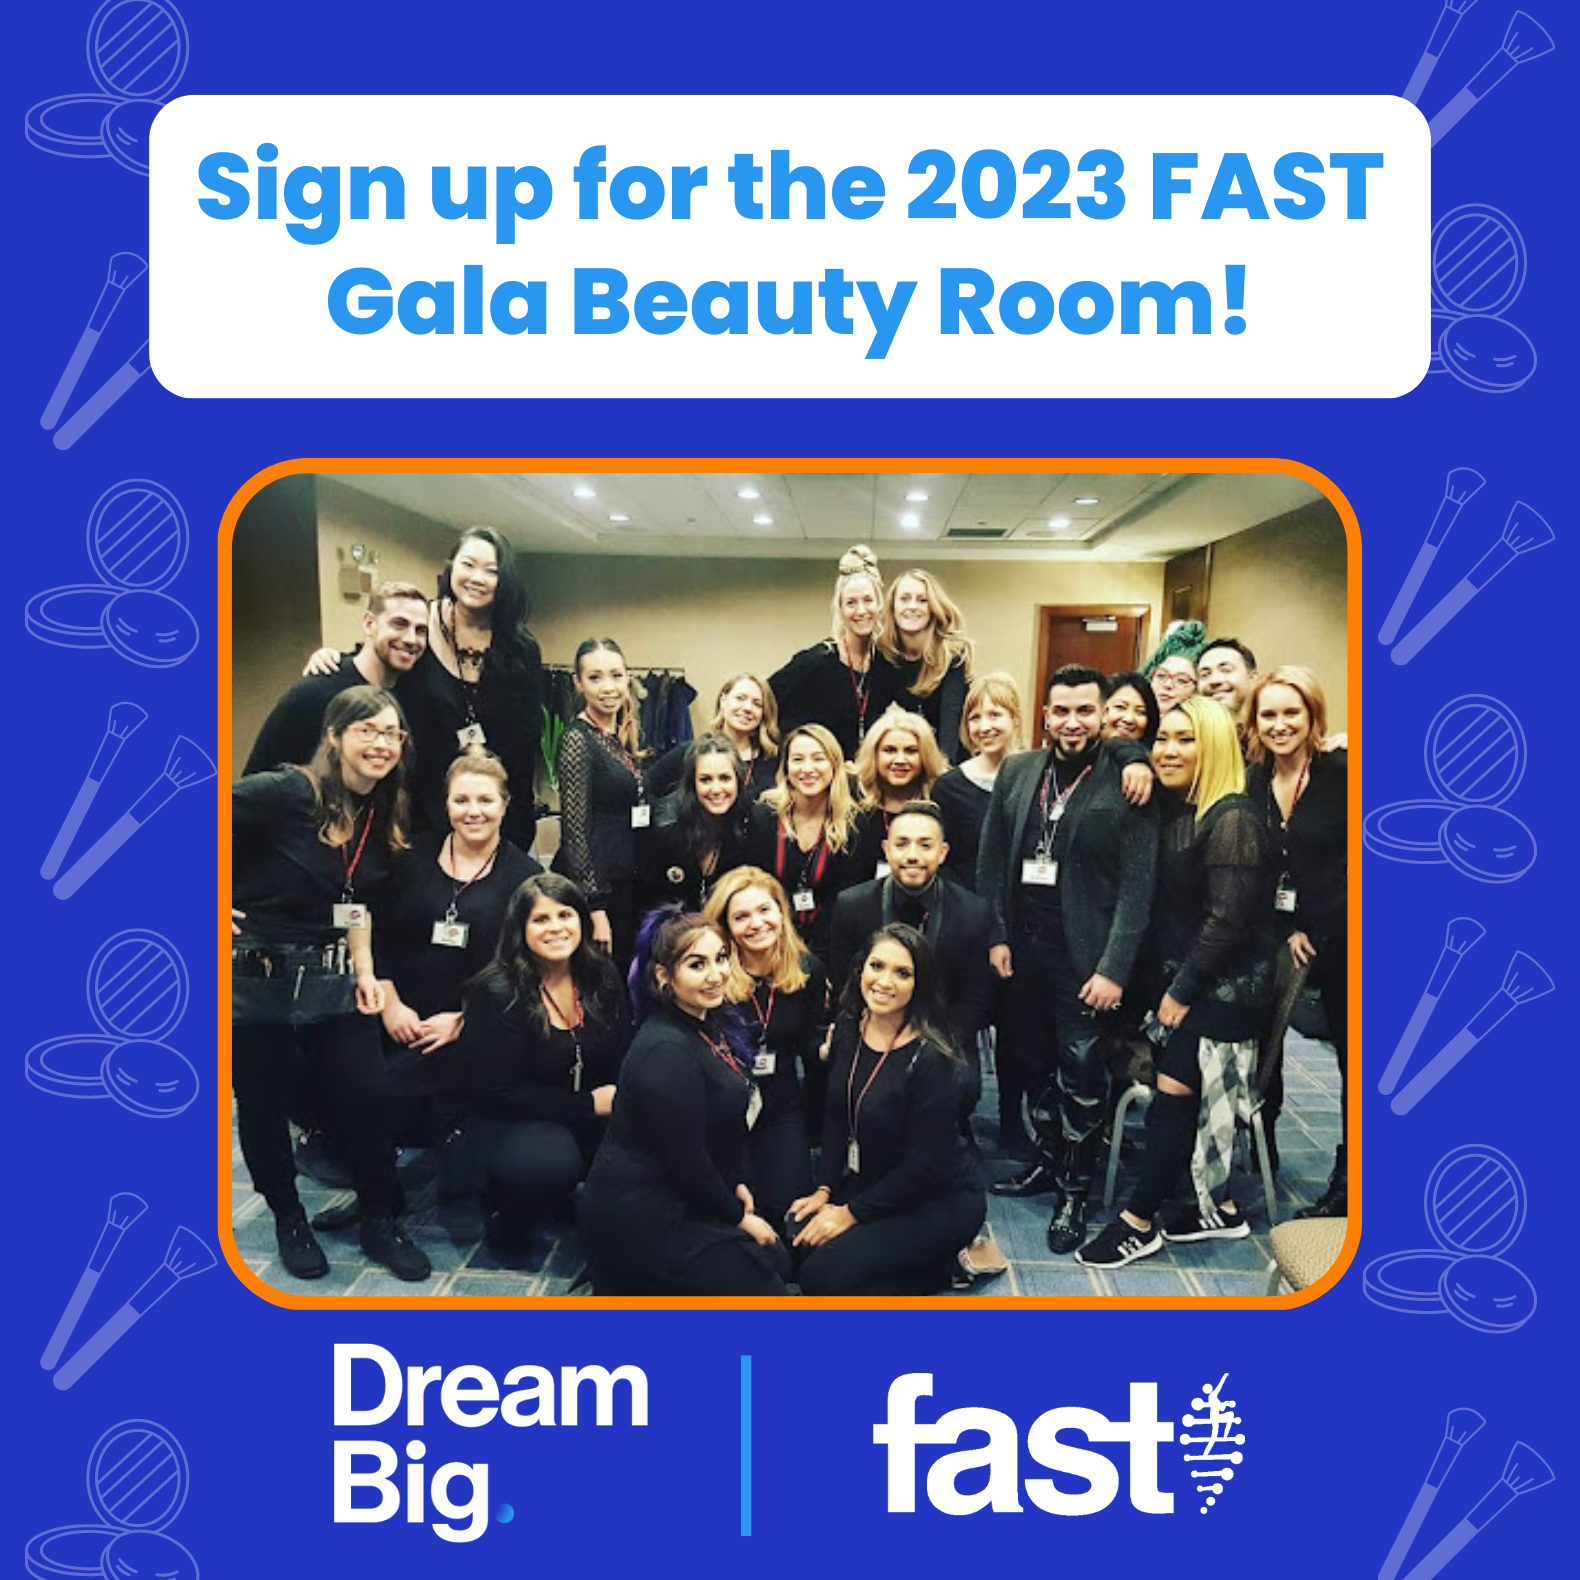 Sign up for the 2023 FAST Gala Beauty Room, with a photo of the Beauty Room team